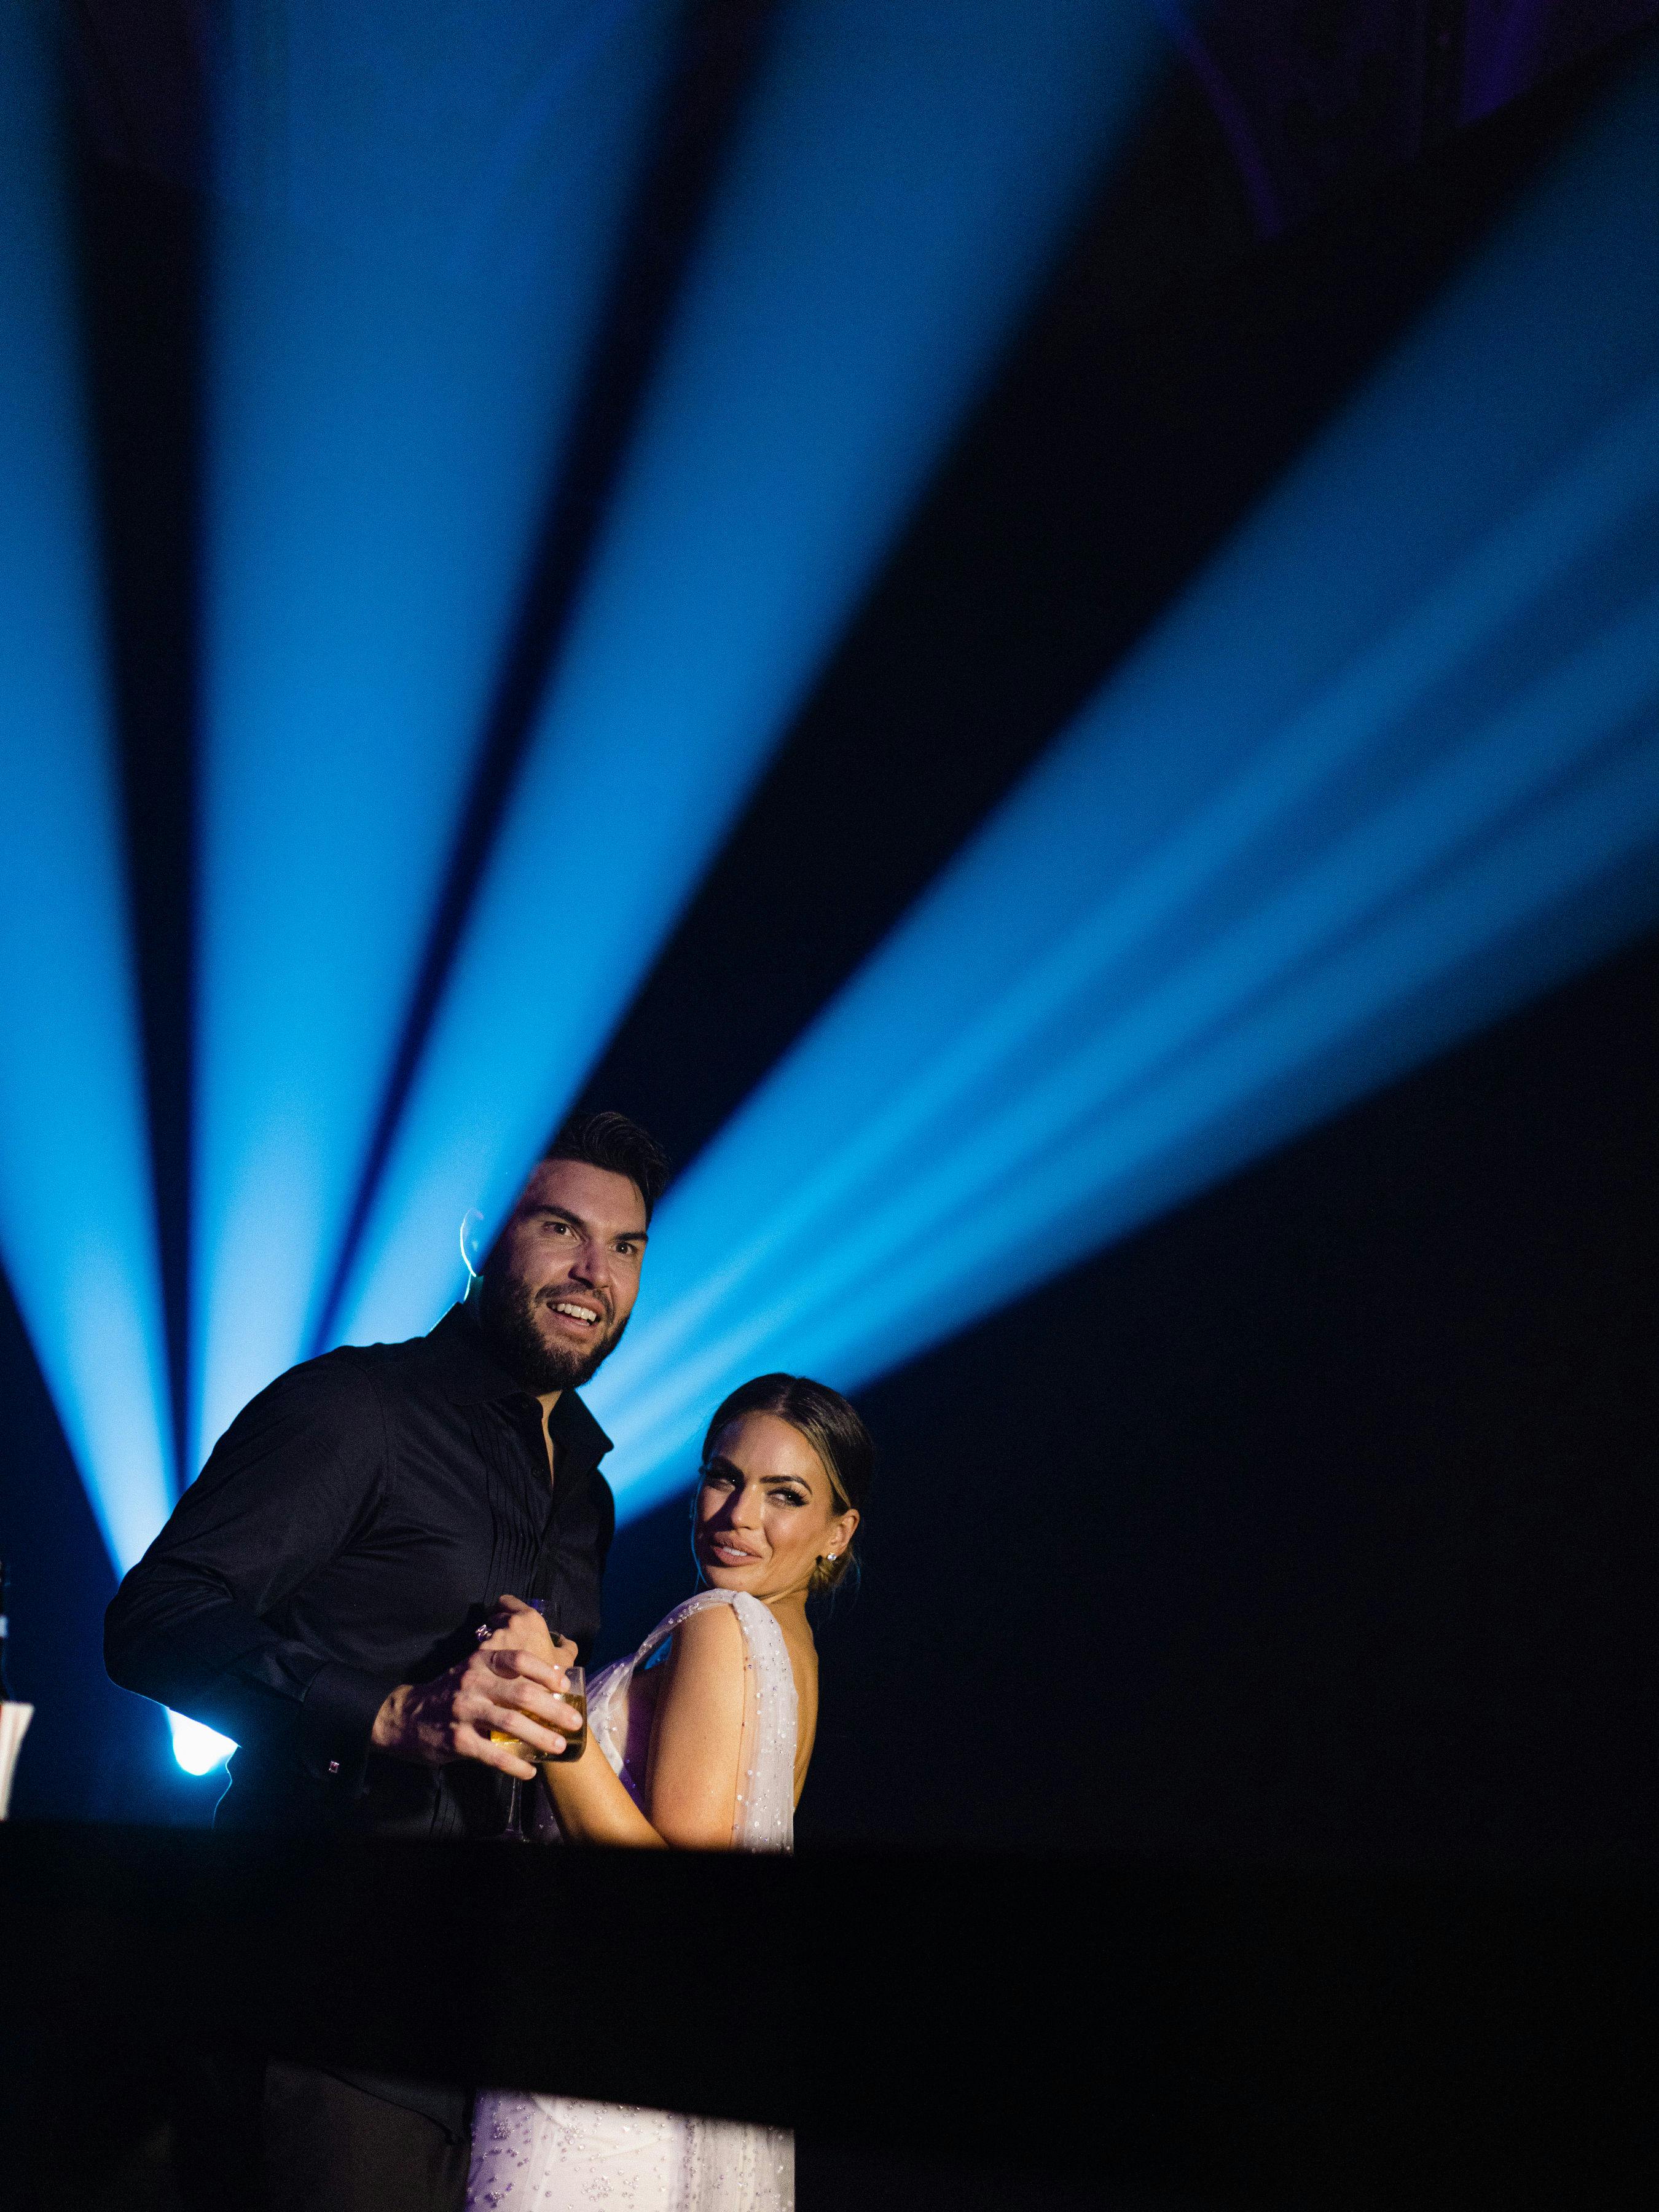 Boston Red Sox's Eric Hosmer and TV Personality Kacie McDonnell's